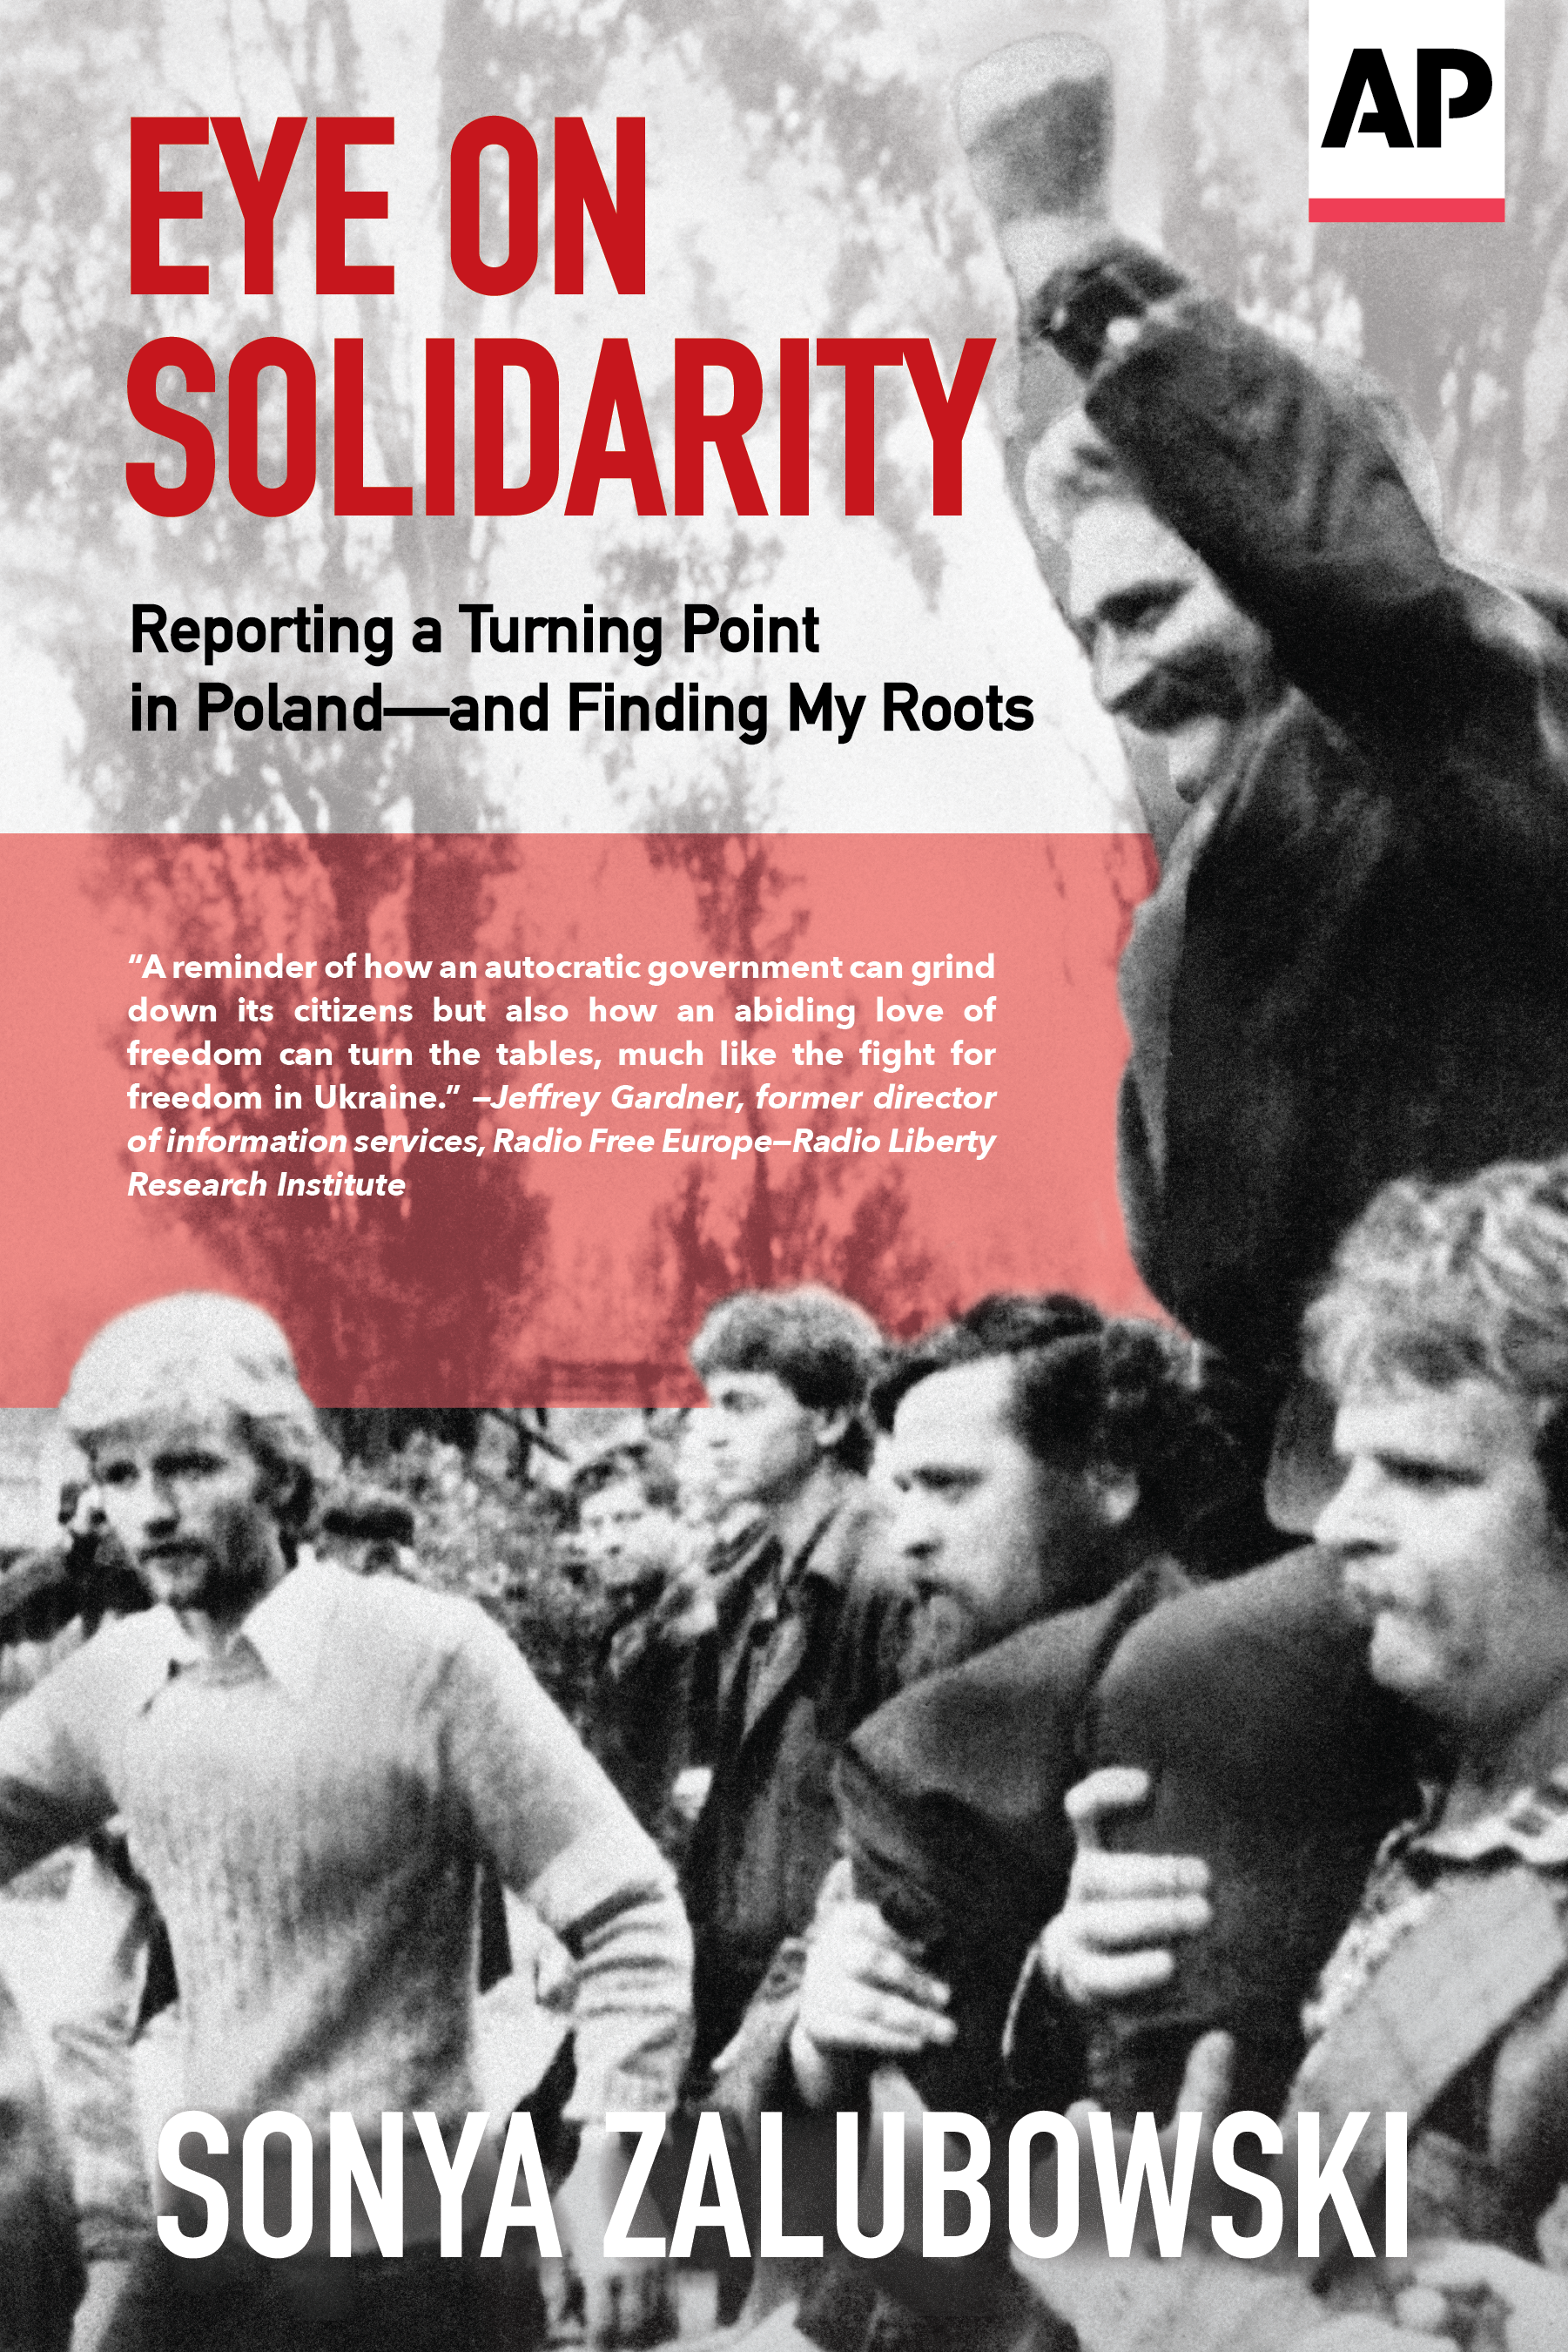 Eye on Solidarity: Reporting a Turning Point in Poland—and Finding My Roots